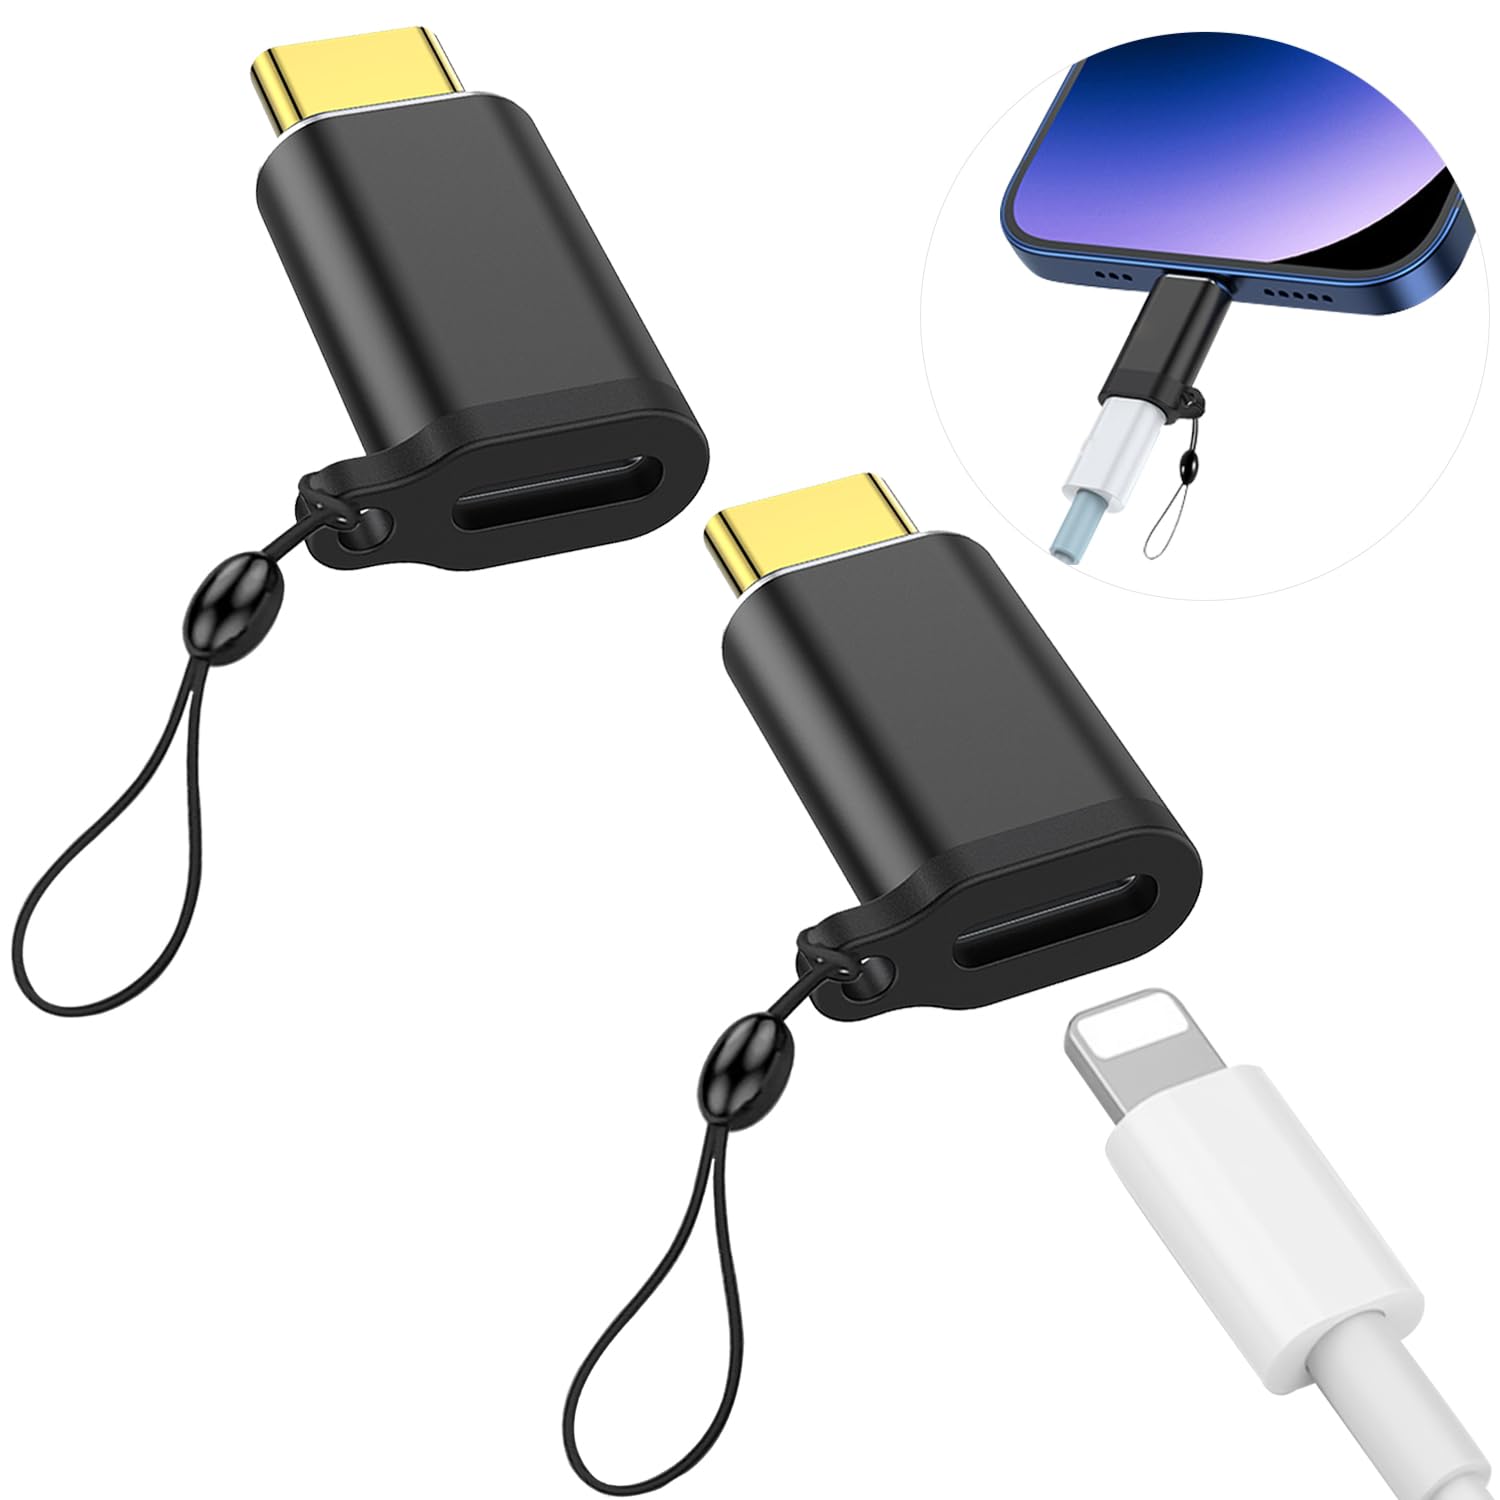 RA___ライトニング to USB-C <strong>変換</strong>アダプタ TRAOO [2024NEW発売] ライトニング タイプc <strong>変換</strong> [2個セット]ライトニング タイプc <strong>変換</strong> PD 60W急速充電 <strong>ライトニングからタイプc</strong> <strong>変換</strong>アダプタ MacBook/i-Phone15/i-Pad/Galaxy/Xperia/Androidなど機器対応